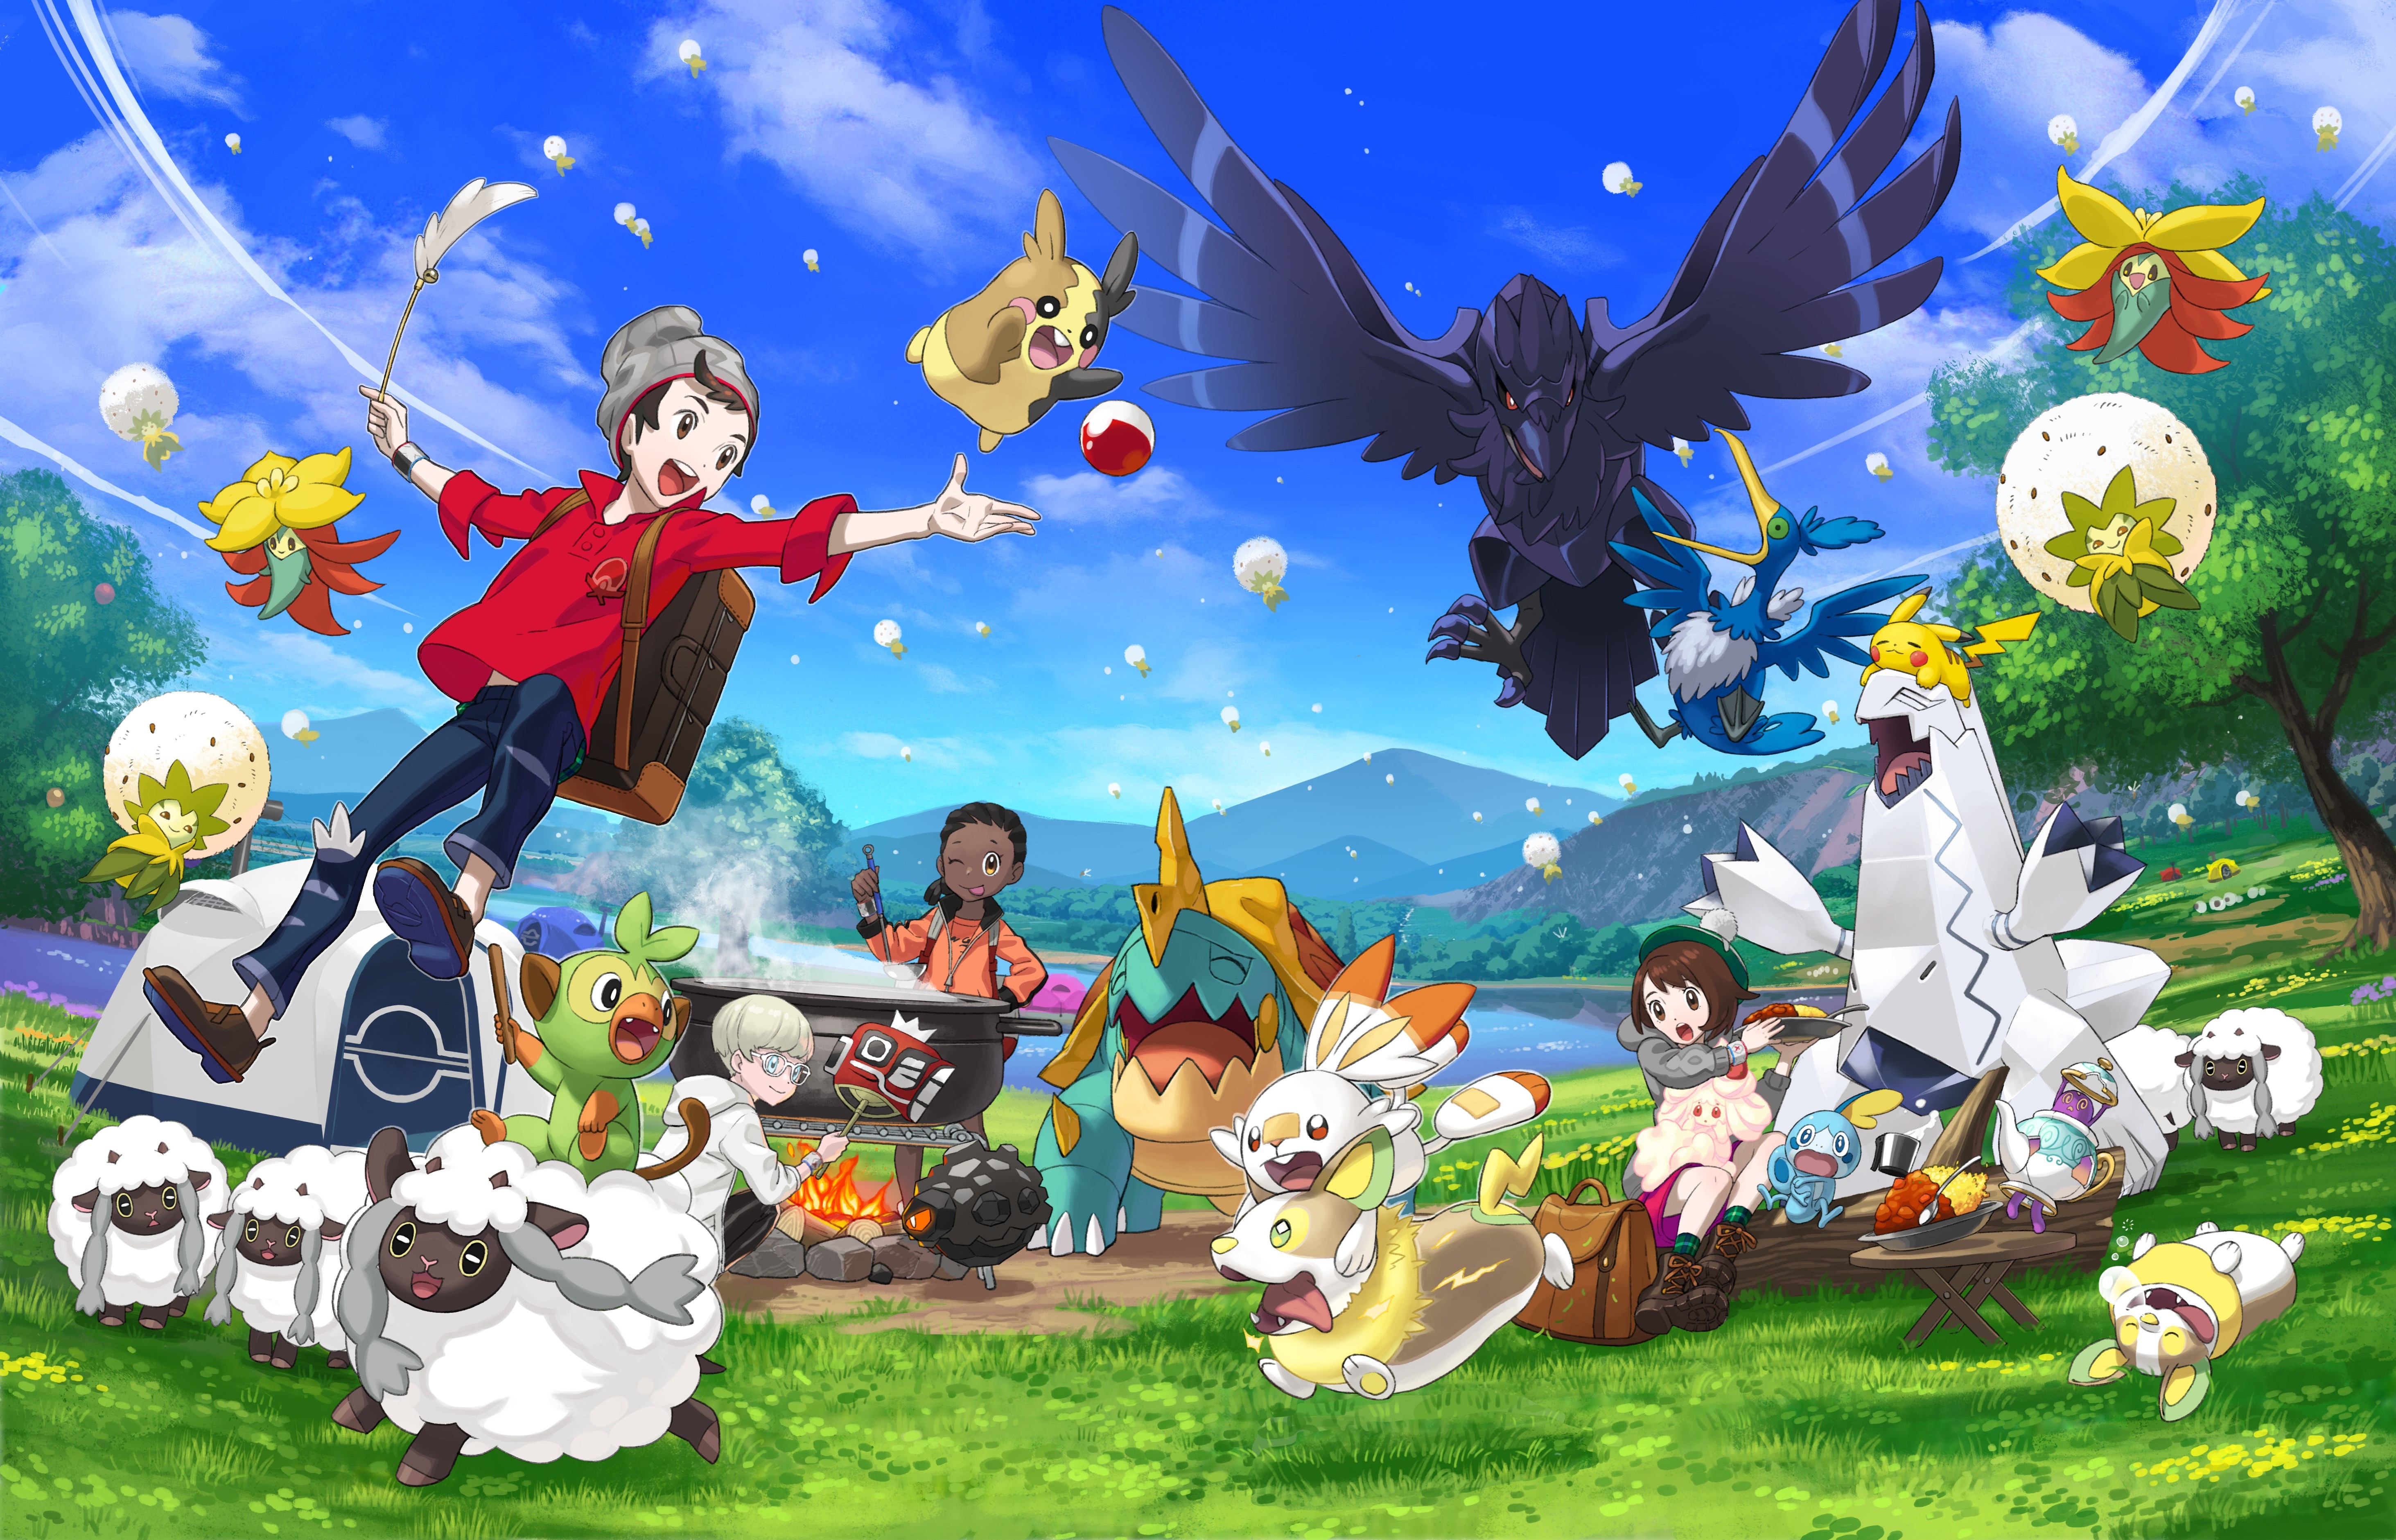 Pokémon Sword and Shield Sales Exceed 6 Units Worldwide After Massive Launch | Wire